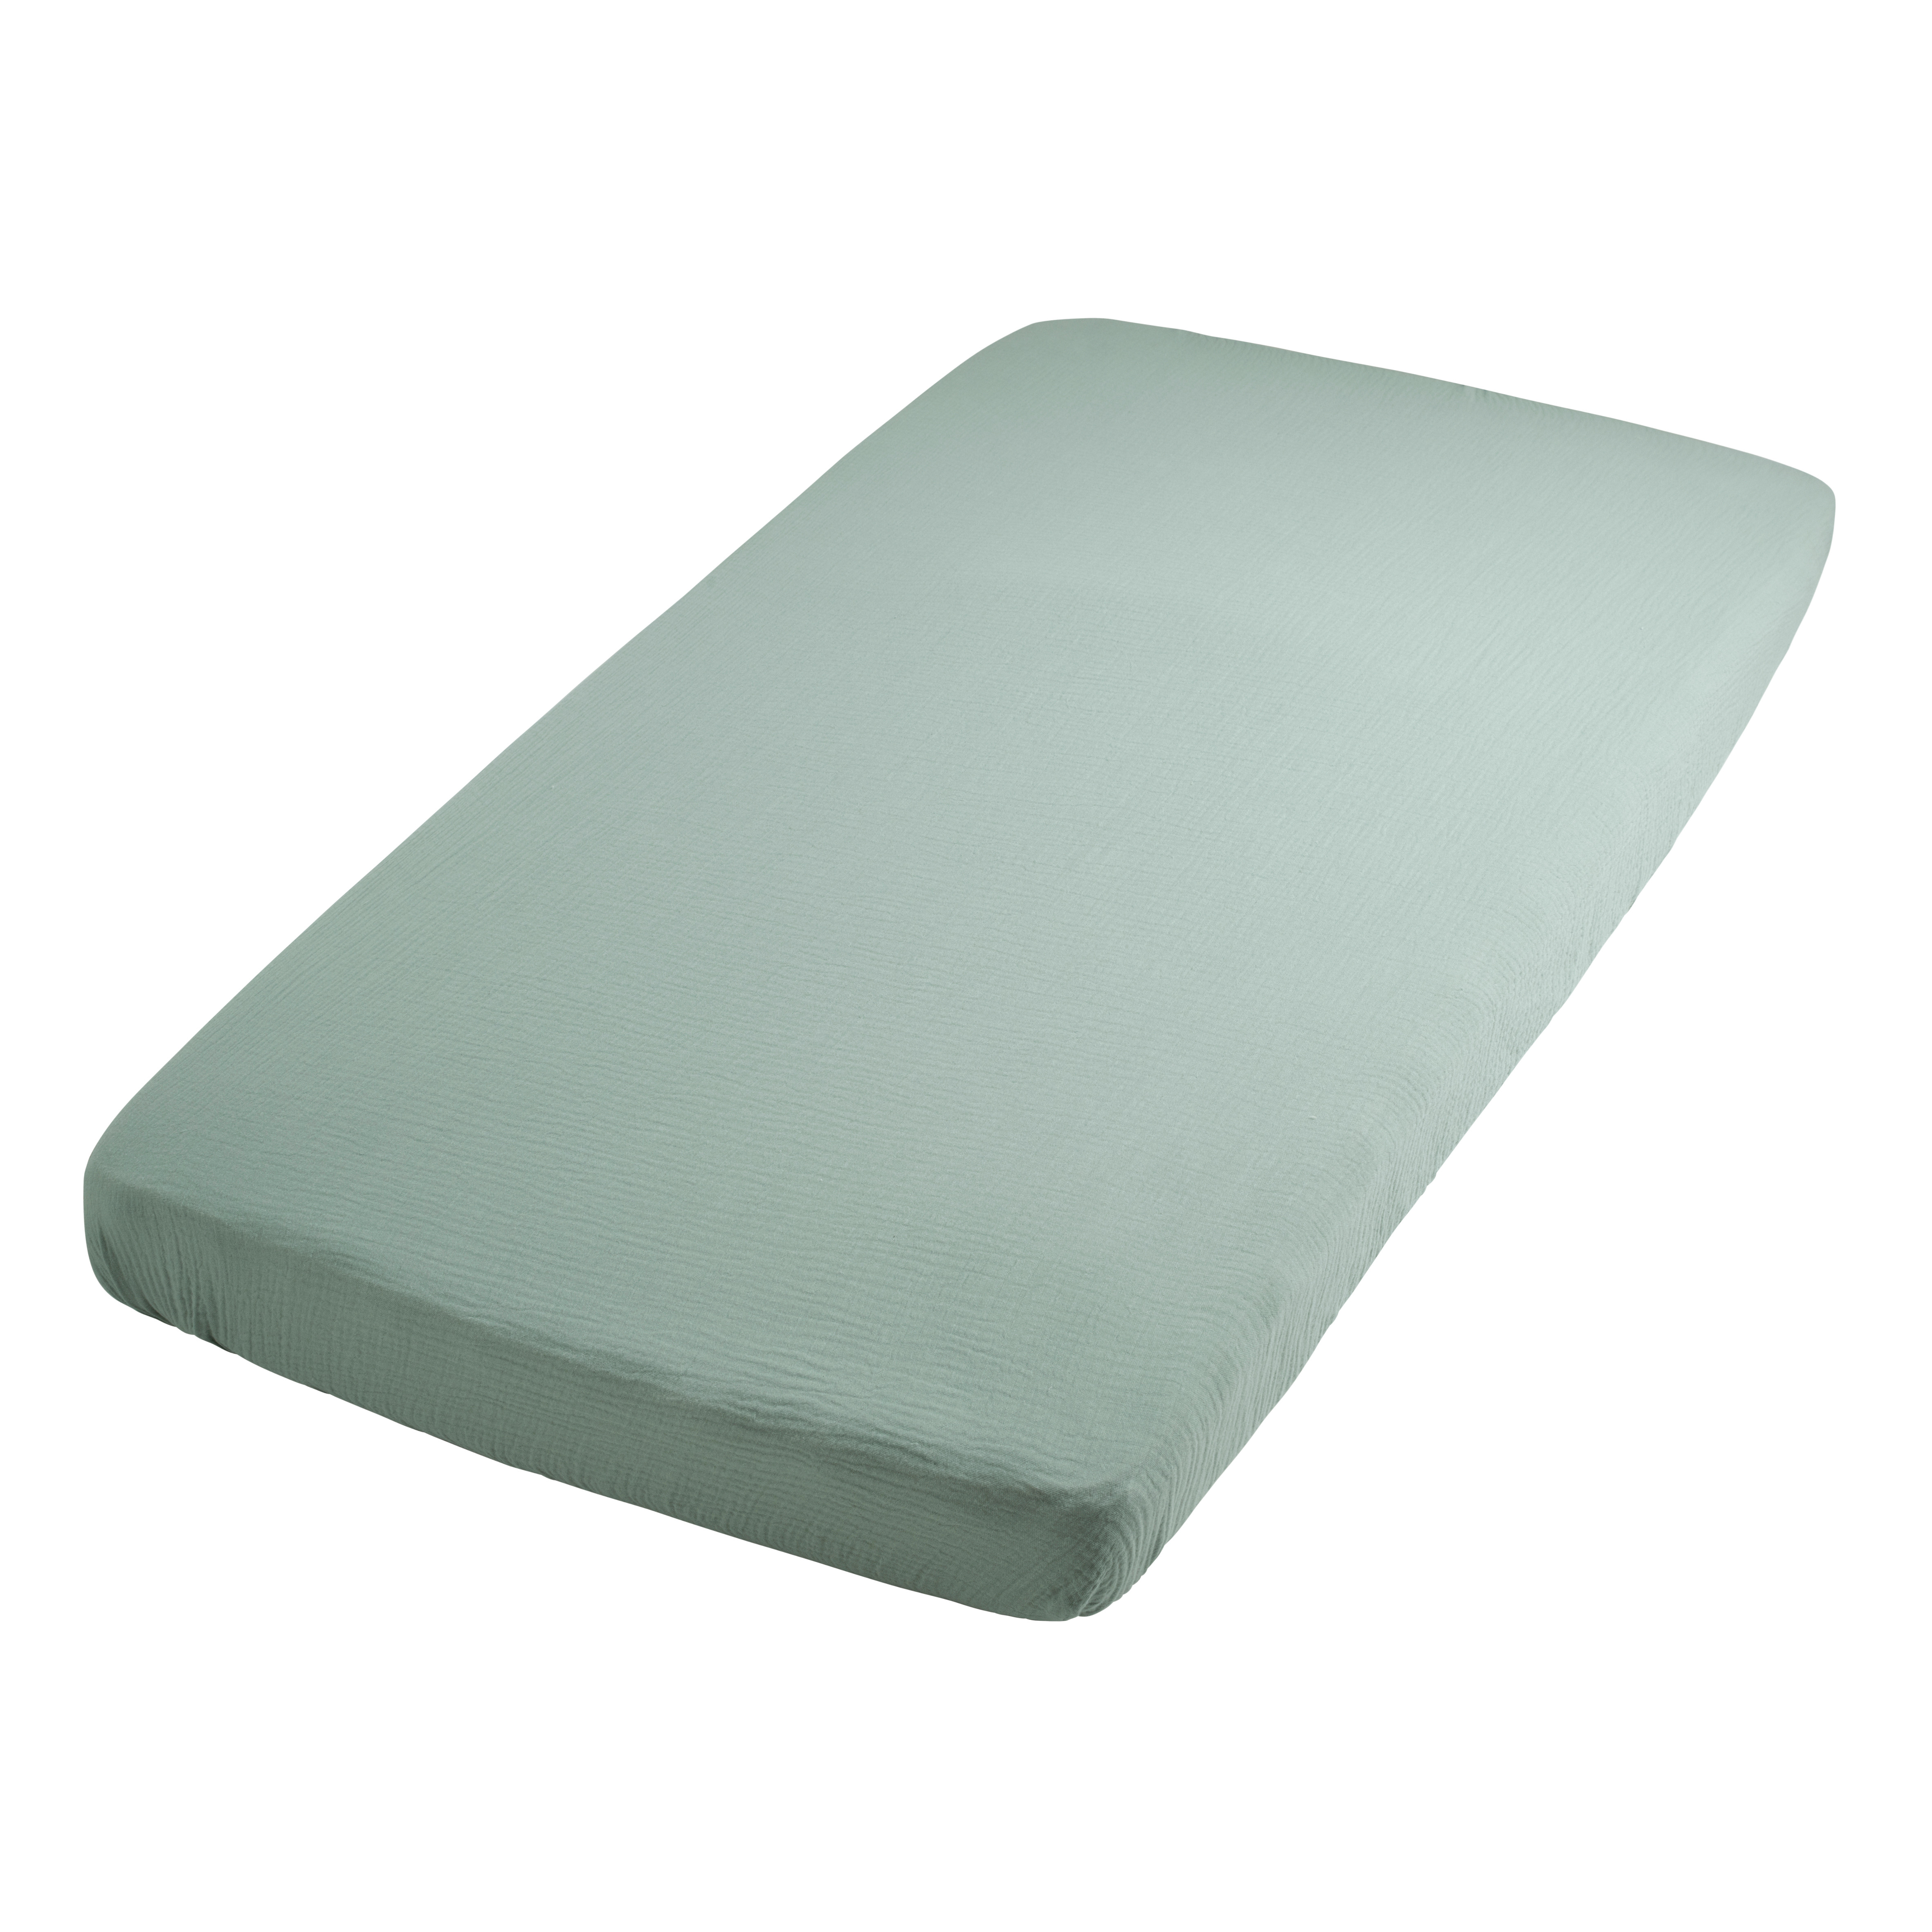 Fitted sheet Fresh ECO stonegreen - 60x120